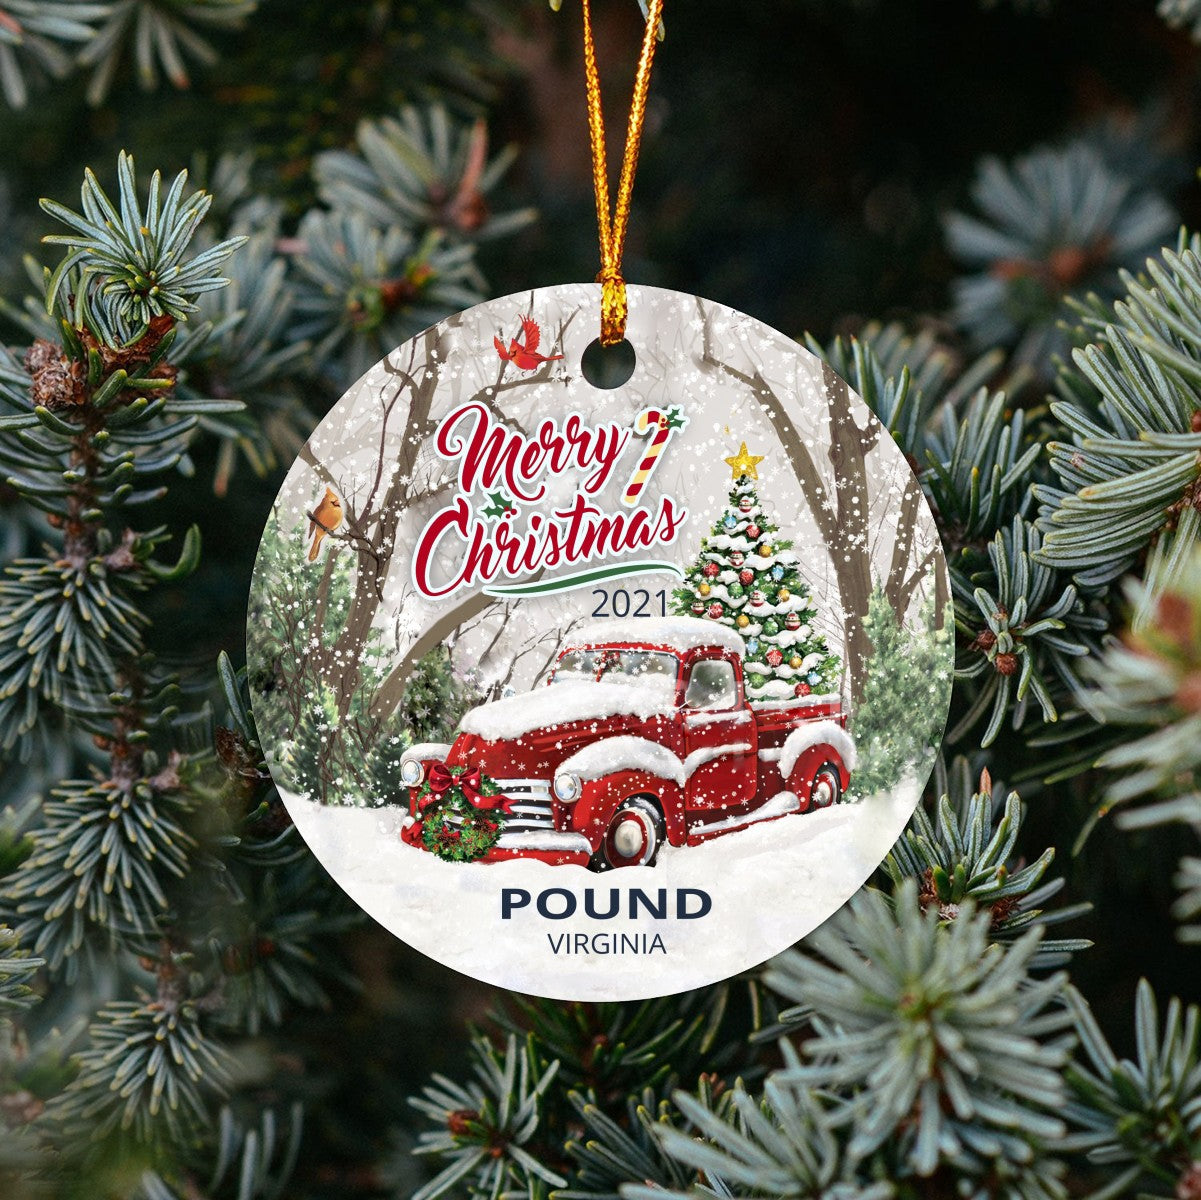 Christmas Tree Ornaments Pound - Ornament With Name City, State Pound Virginia VA Ornament - Red Truck Xmas Ornaments 3'' Plastic Gift For Family, Friend And Housewarming